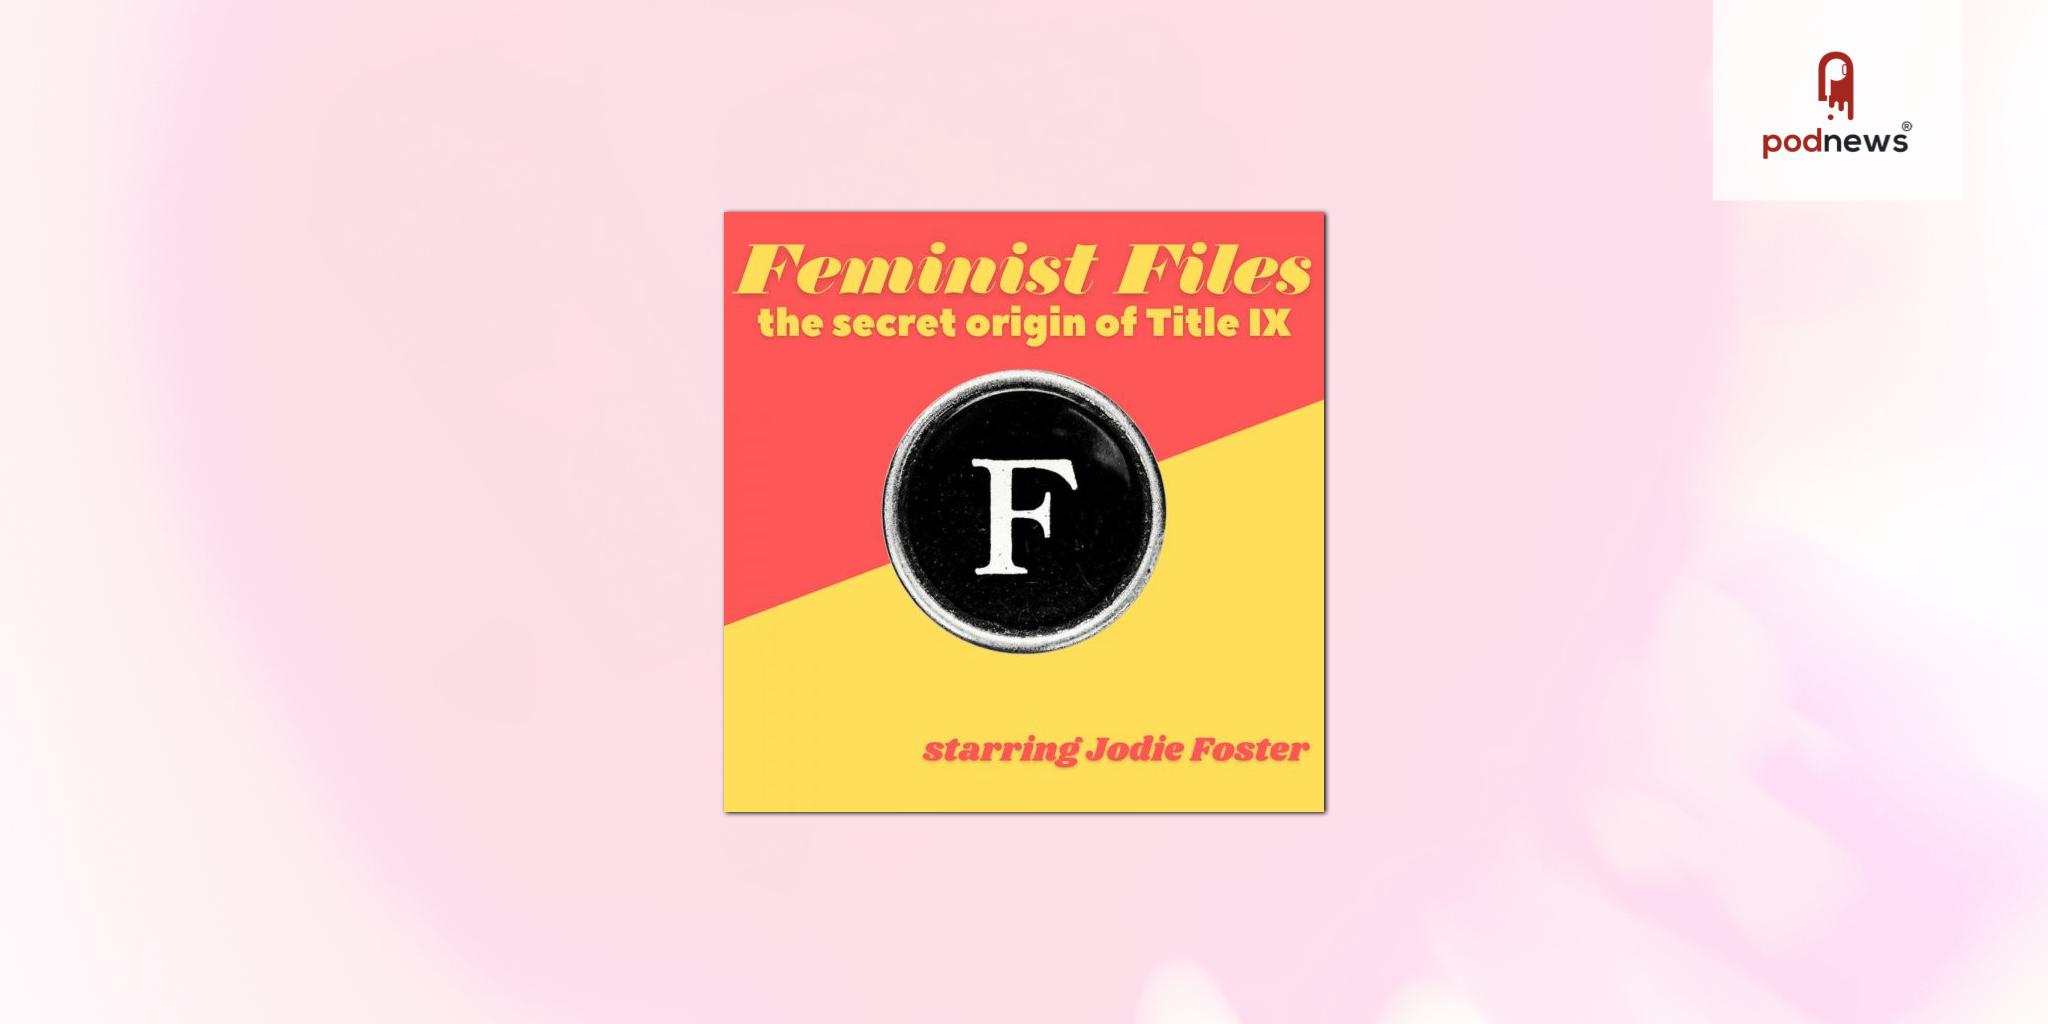 Frequency Machine releases new investigative podcast about the secret origins of Title IX - Feminist Files